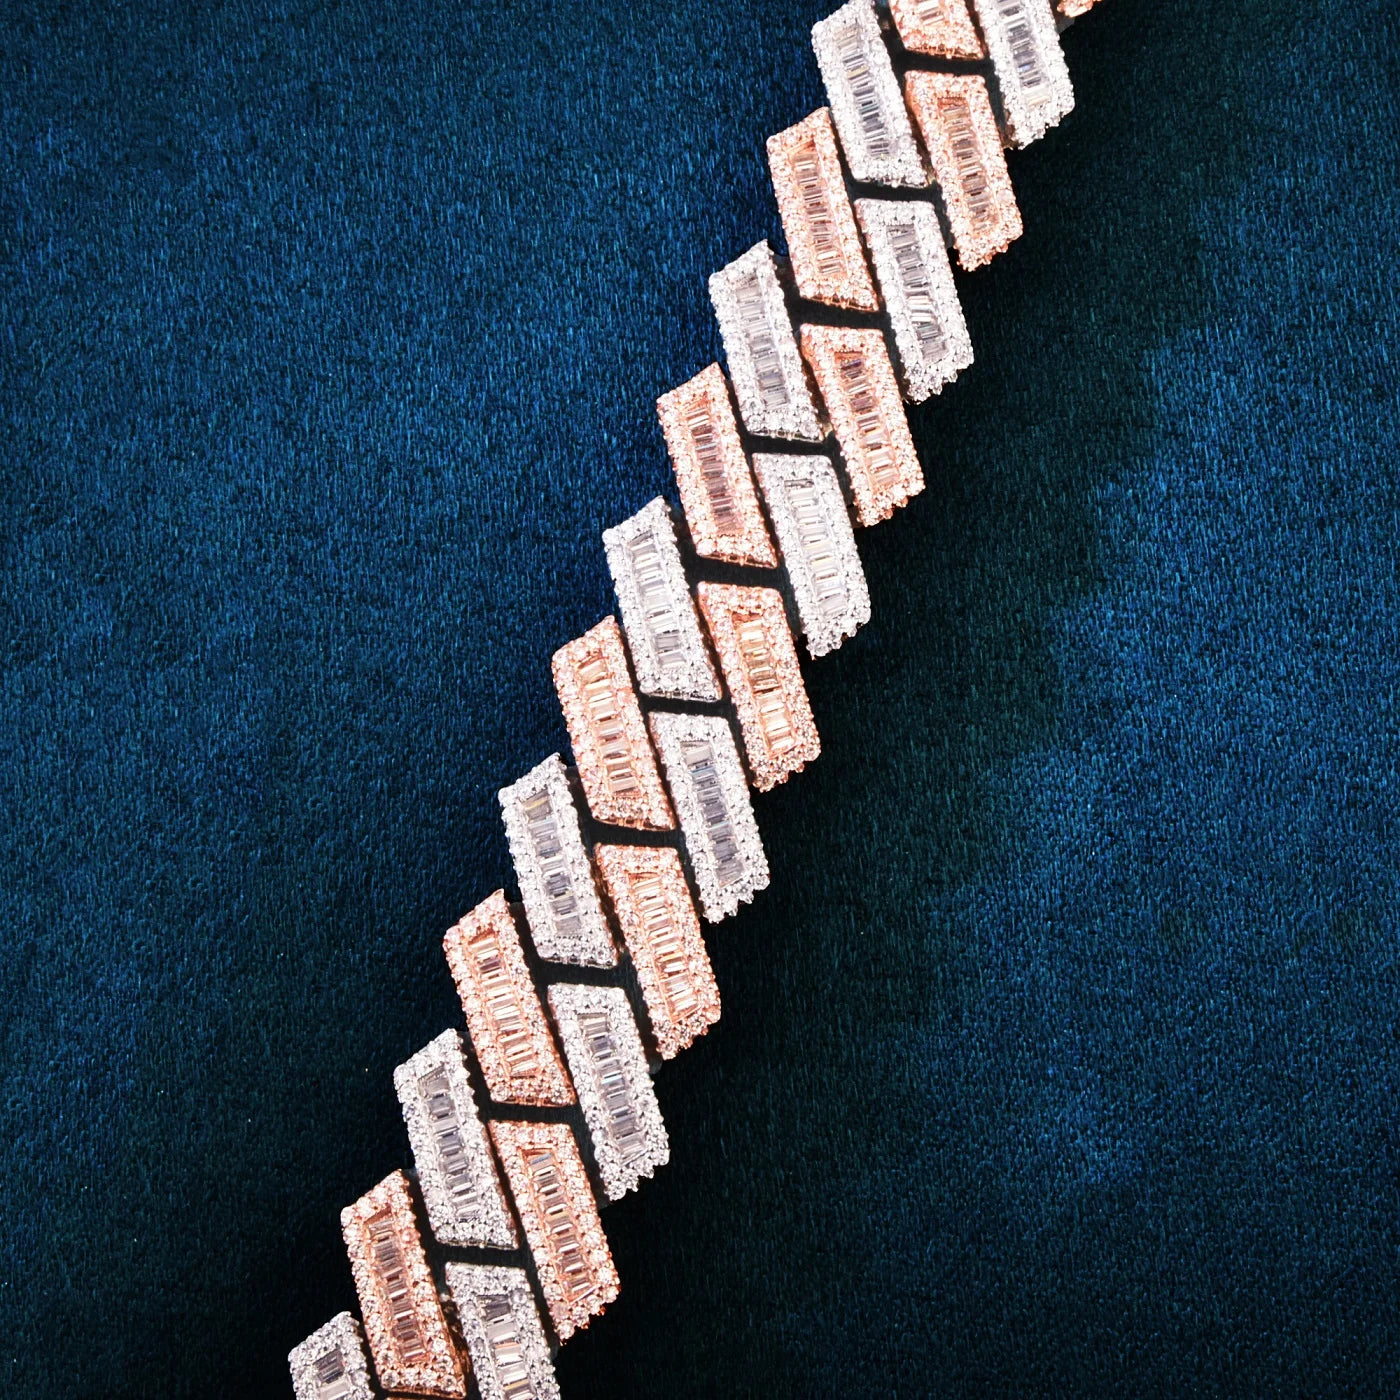 17mm Two-Tone Rose Gold Baguette Miami Prong Cuban Link Diamond Chain Necklace